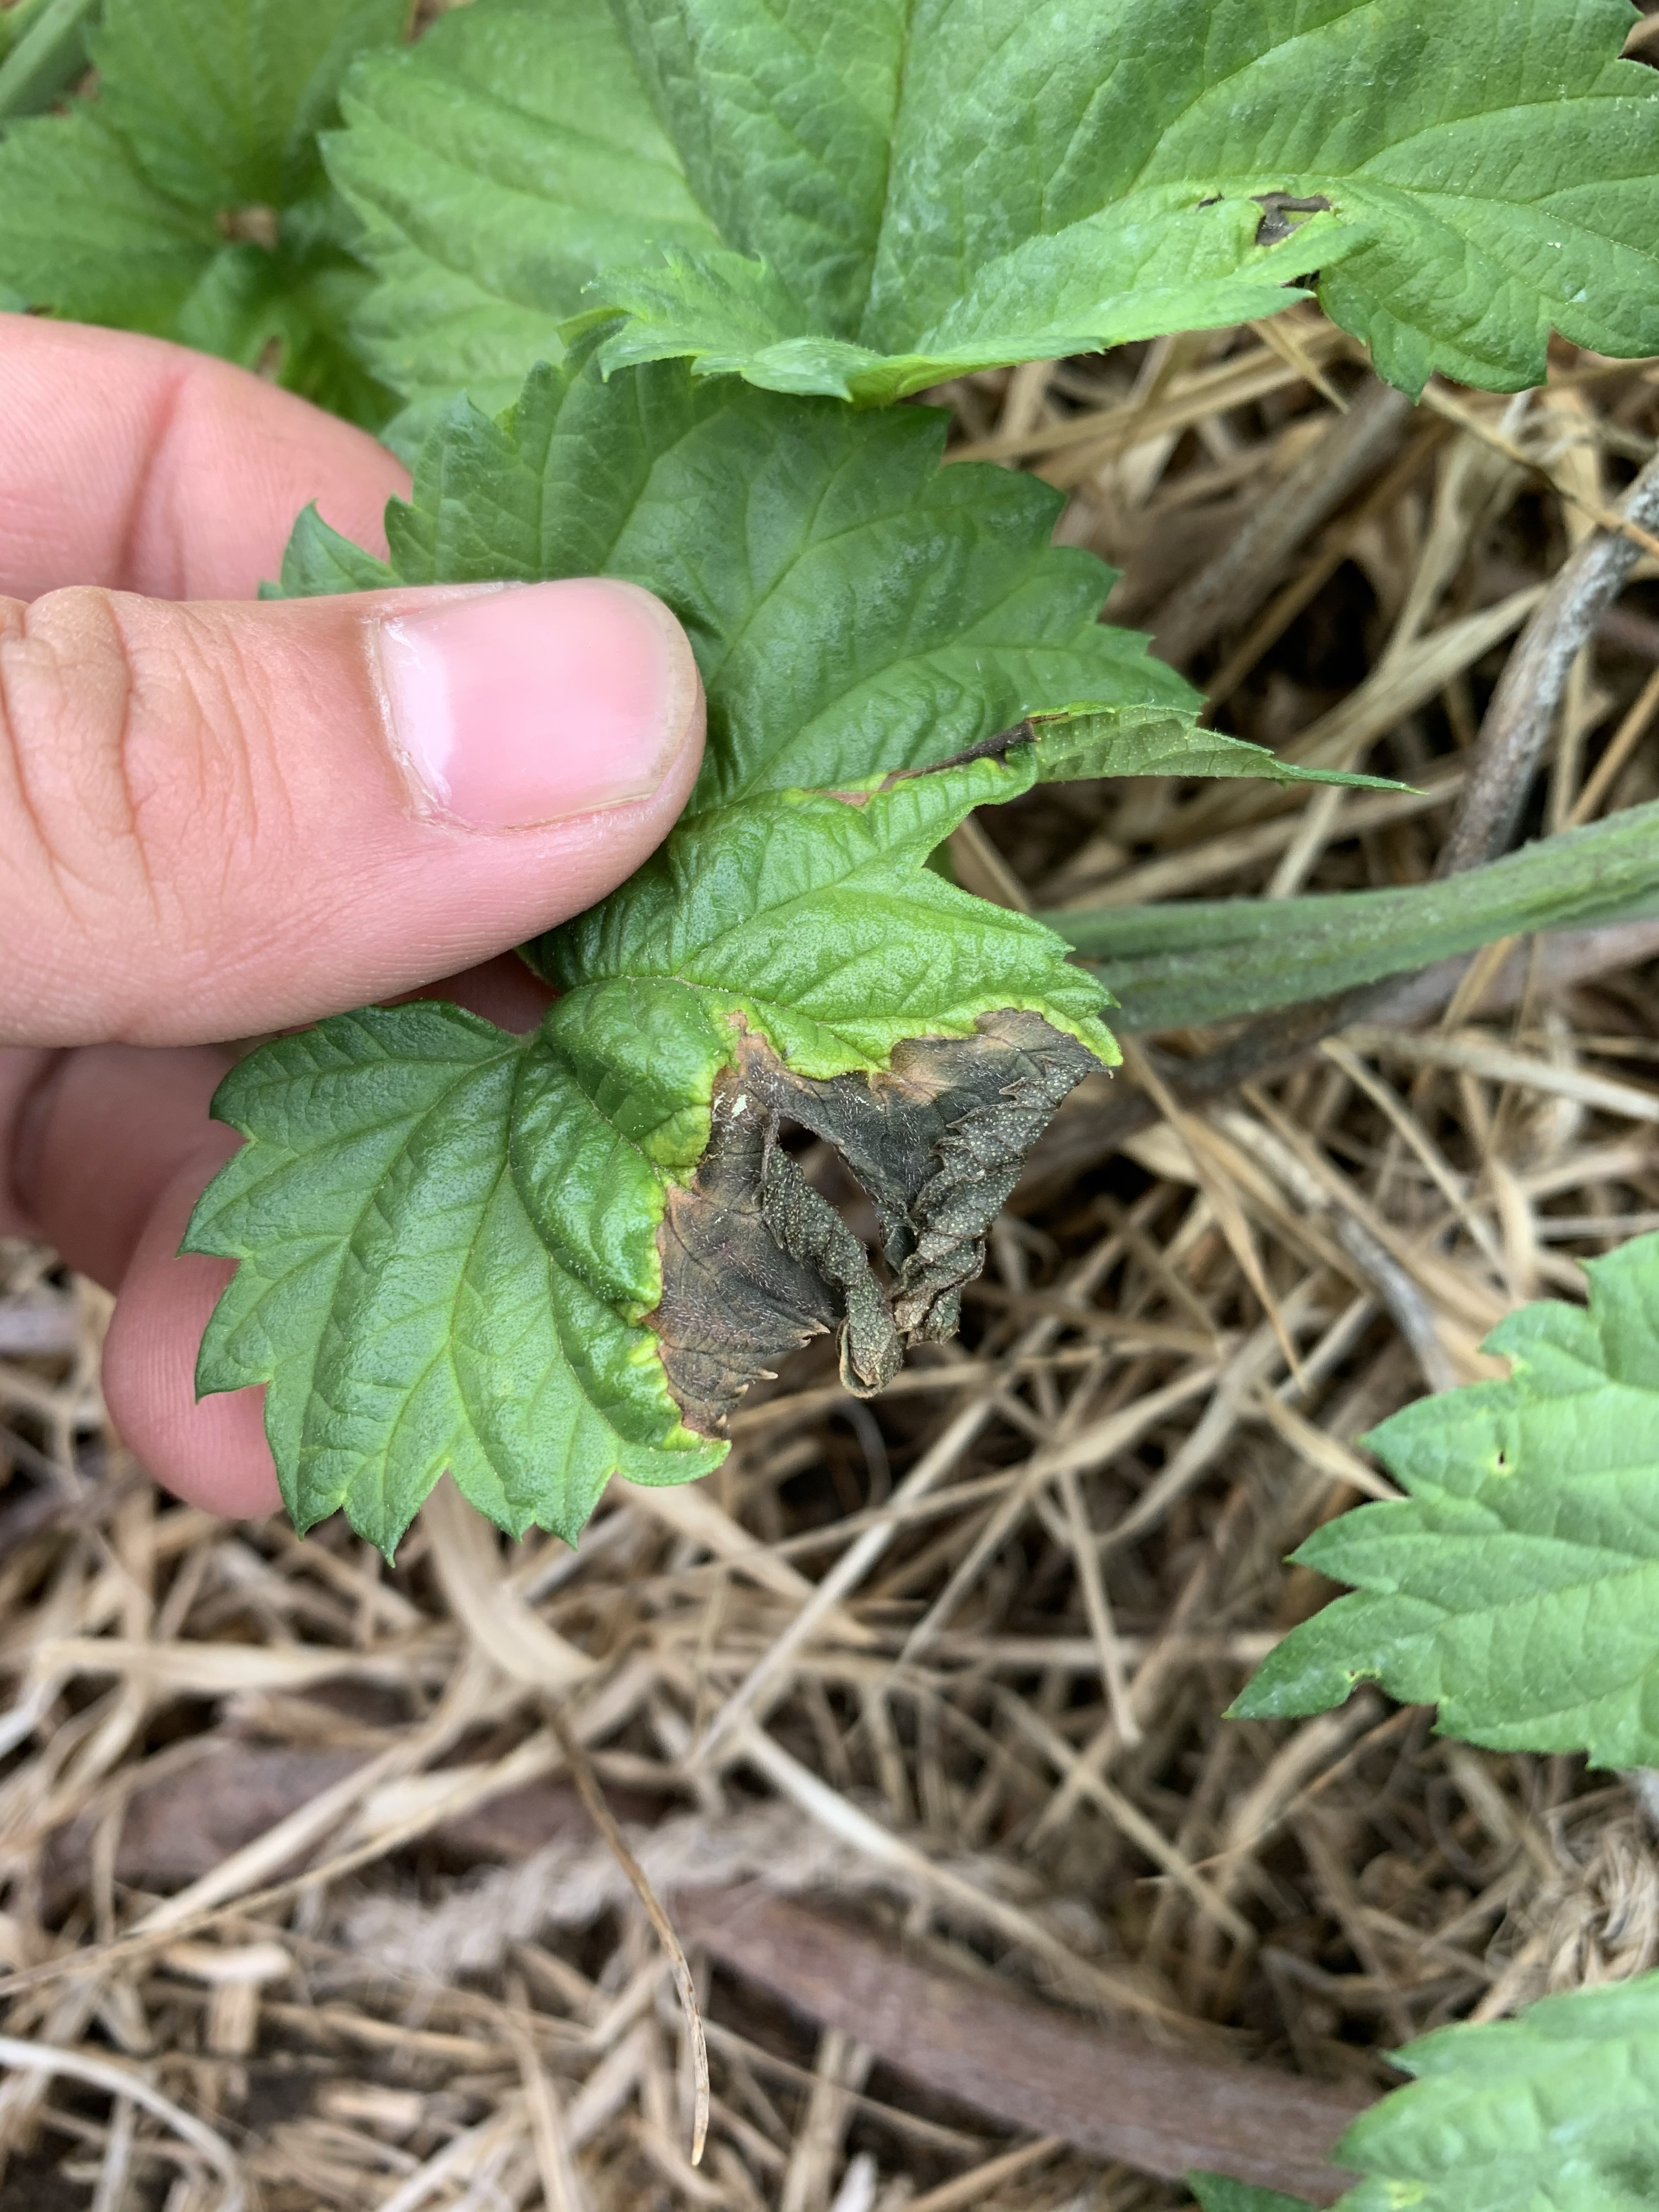 Typical symptoms of halo blight on leaves